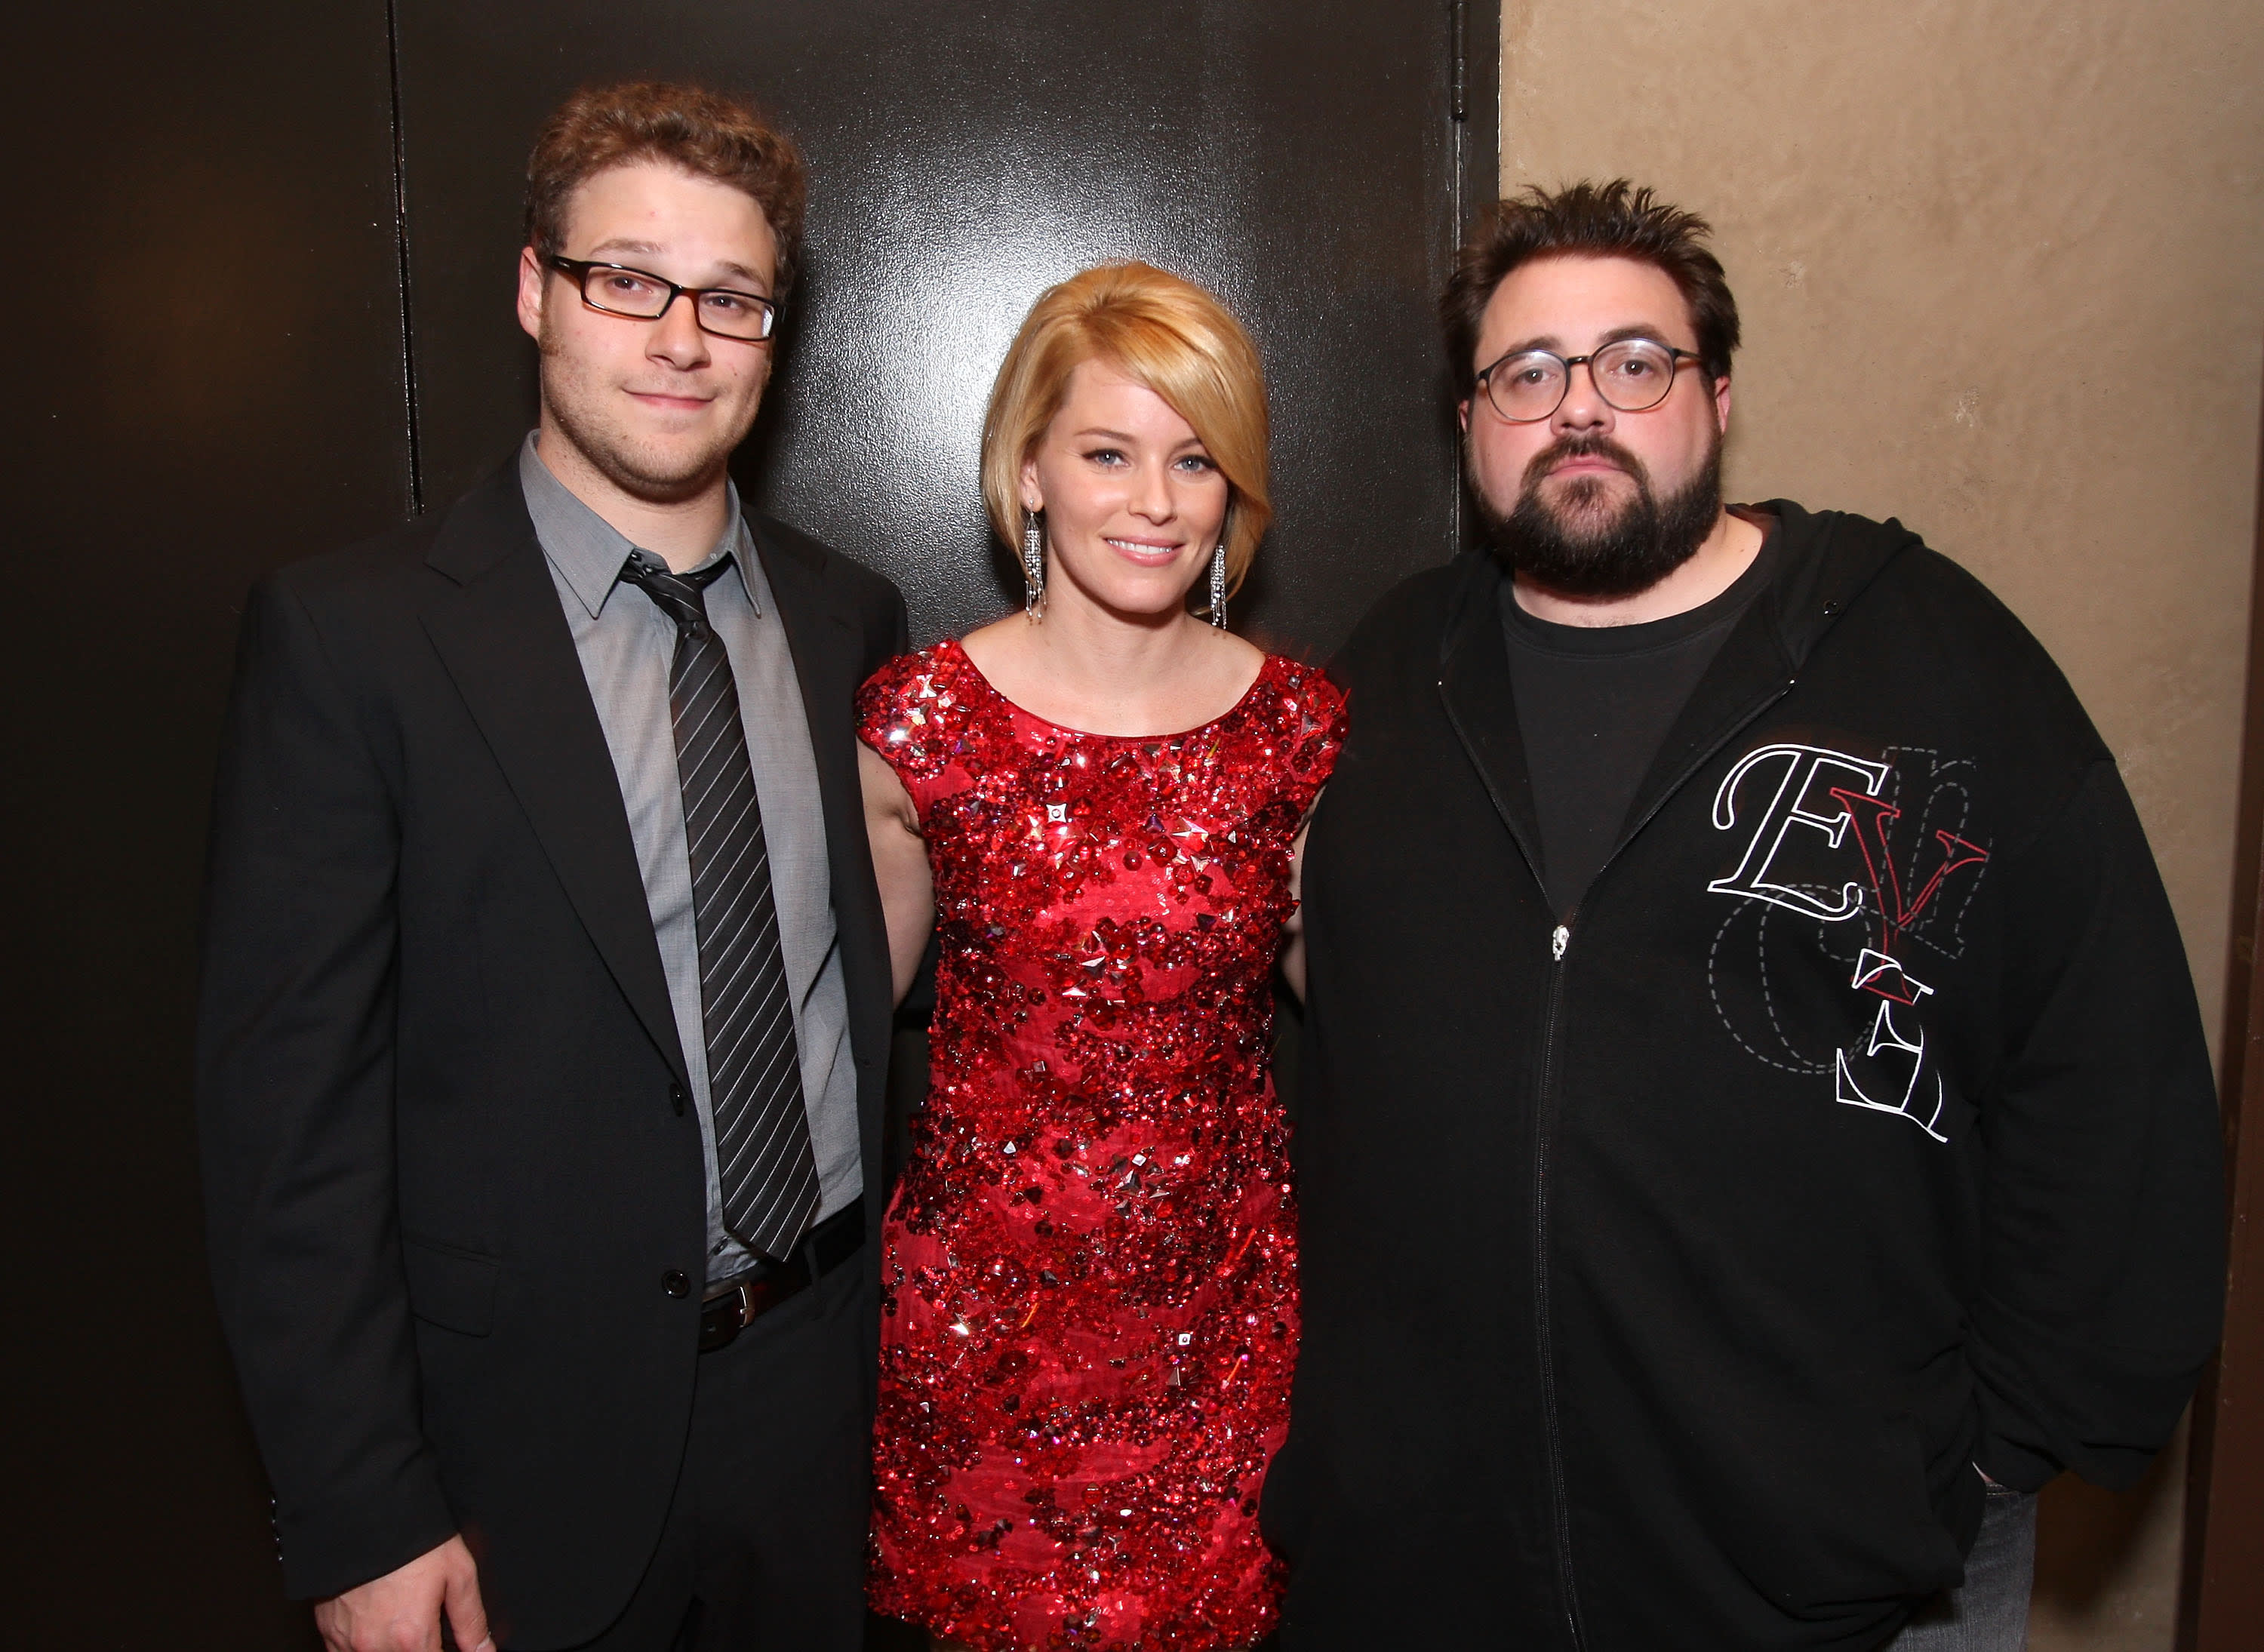 Seth Rogen, Elizabeth Banks and Kevin Smith at the afterparty for &#x27;Zack and Miri Make a Porno&#x27;